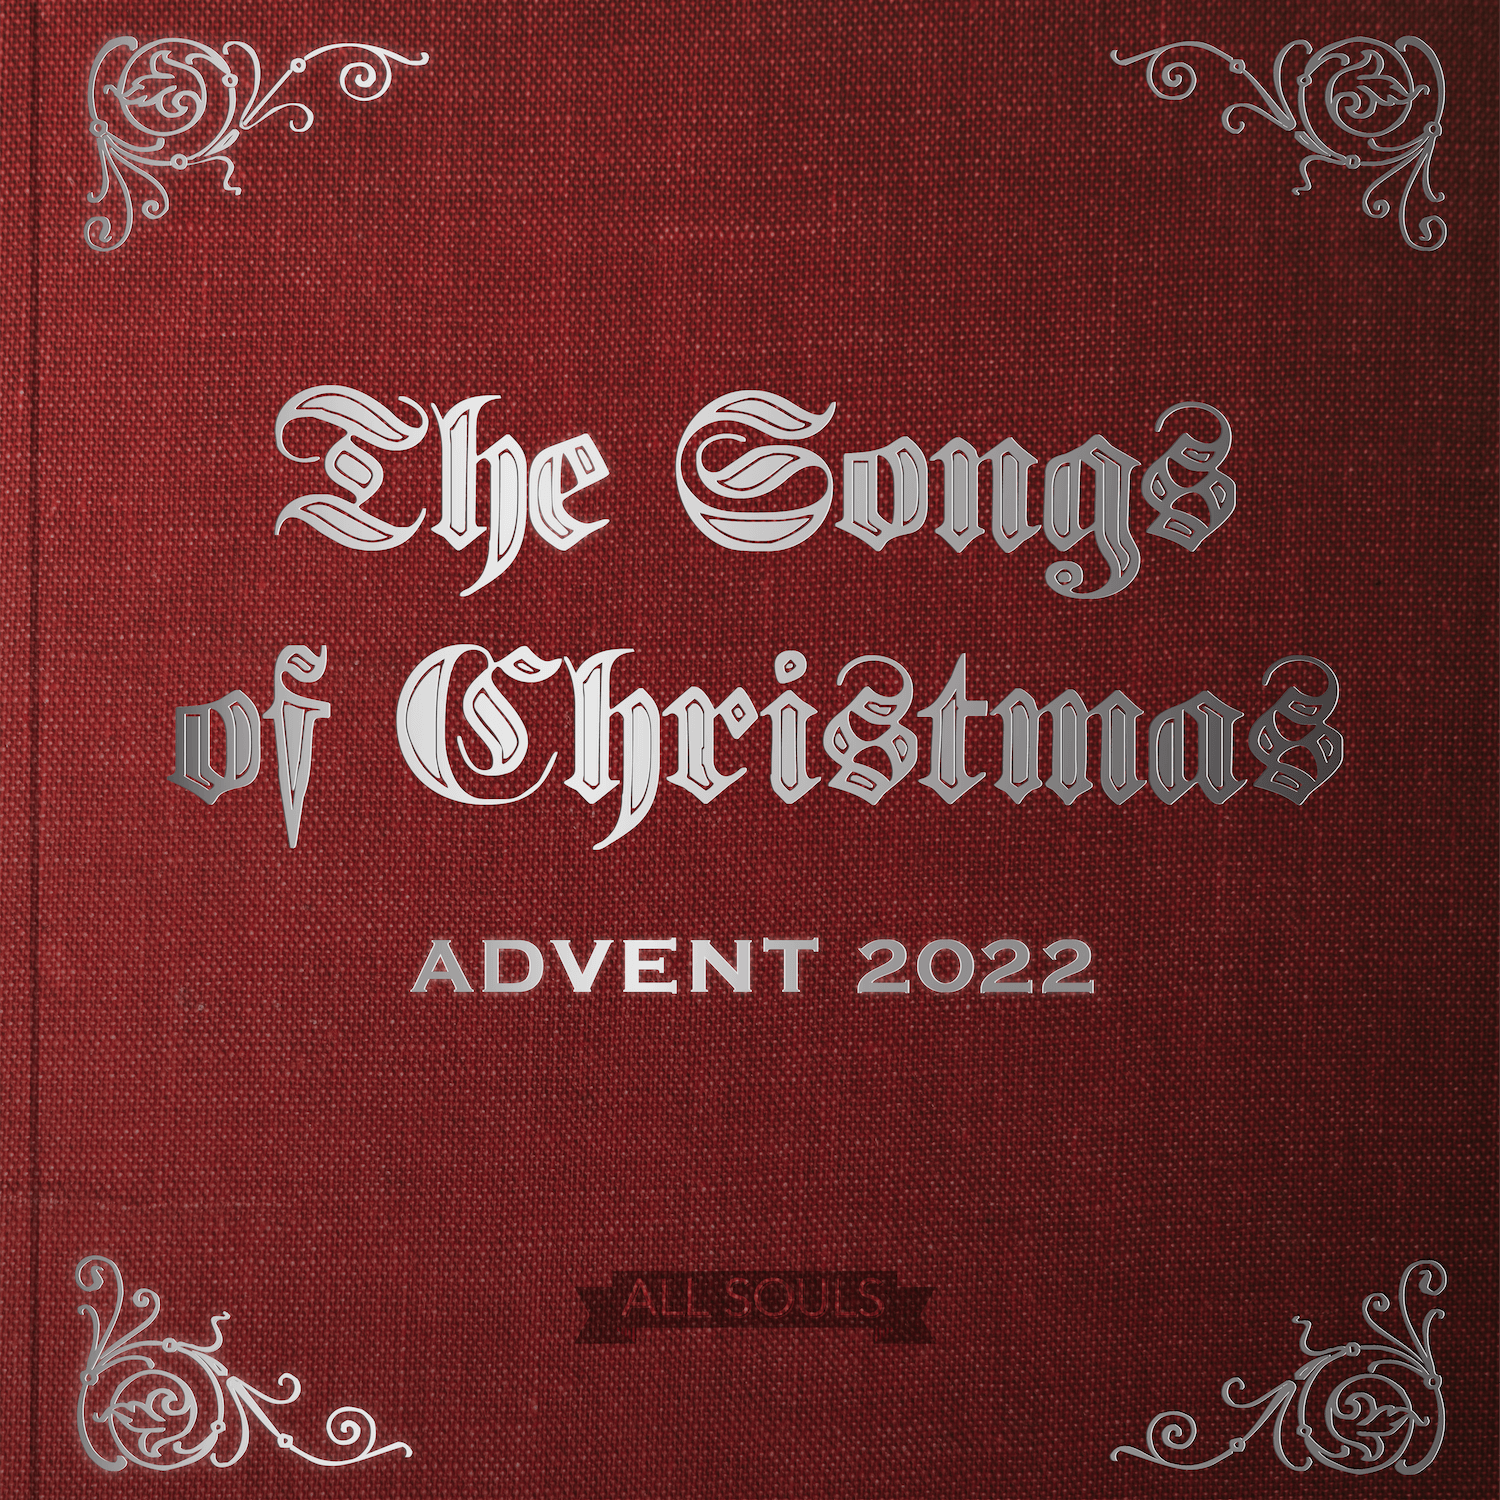 The words The Songs of Christmas in silver on a red book cover